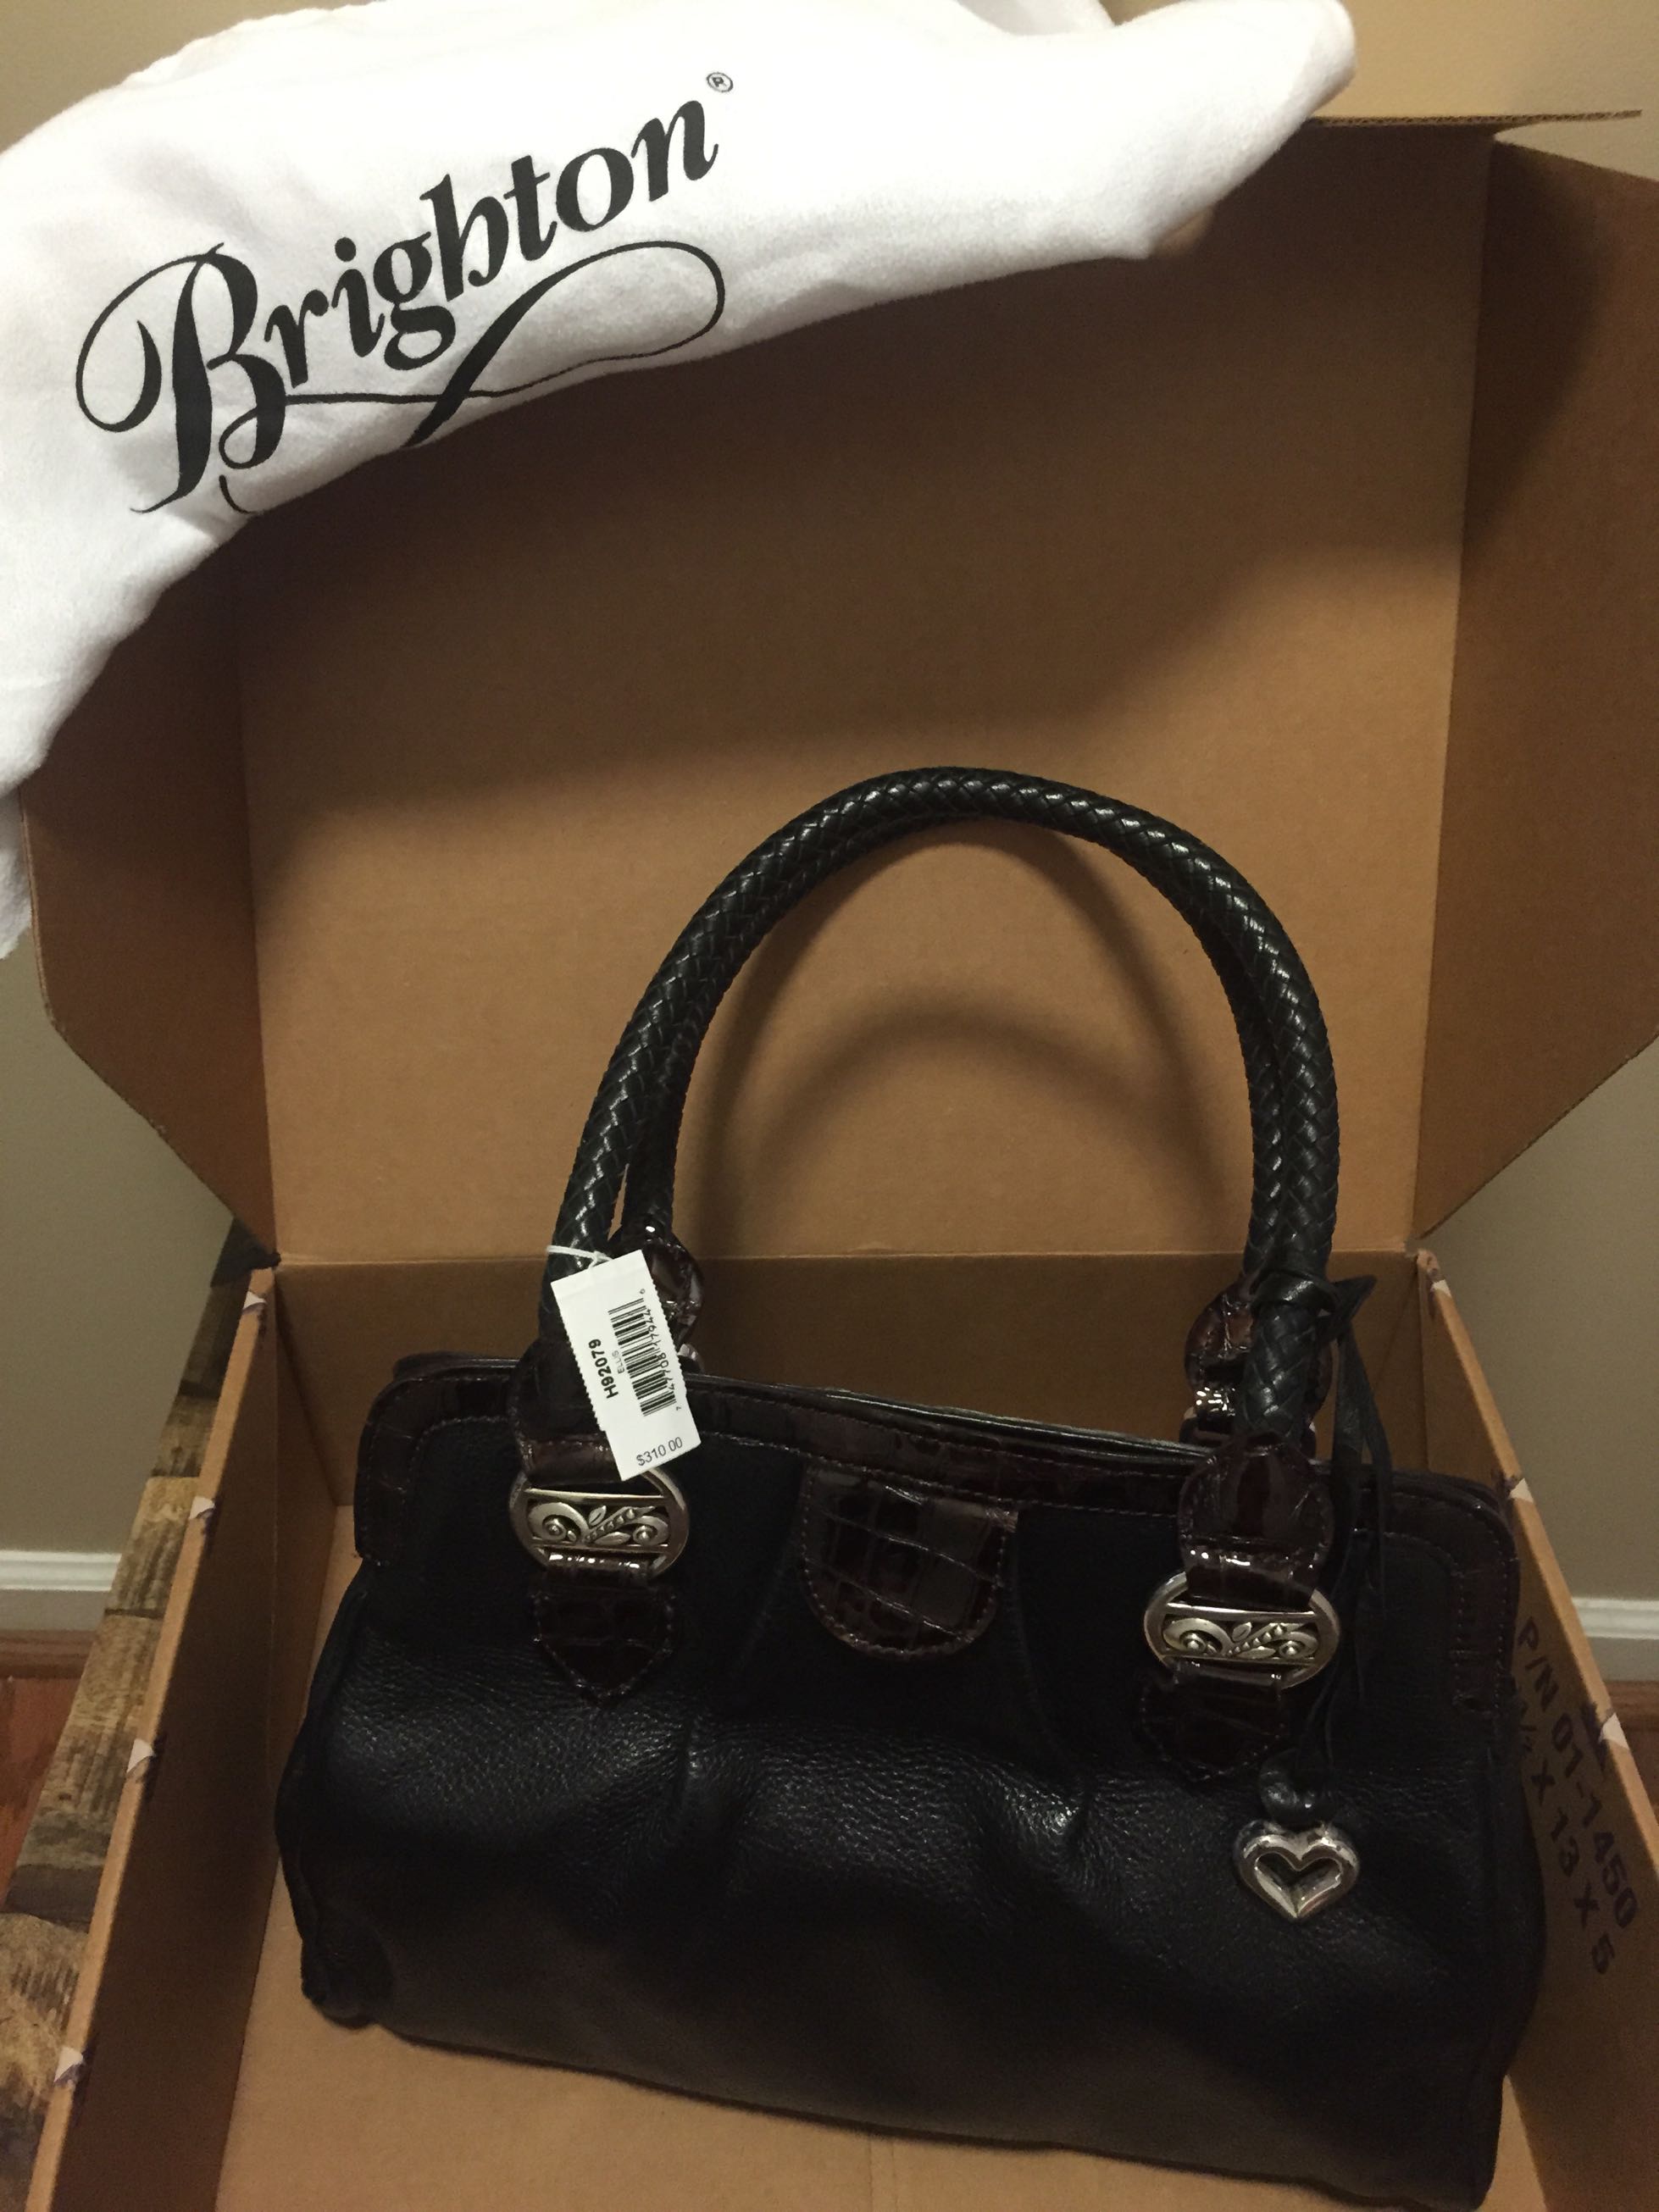 Brighton purse - style Ellis - color black - purchased for $350 for ...